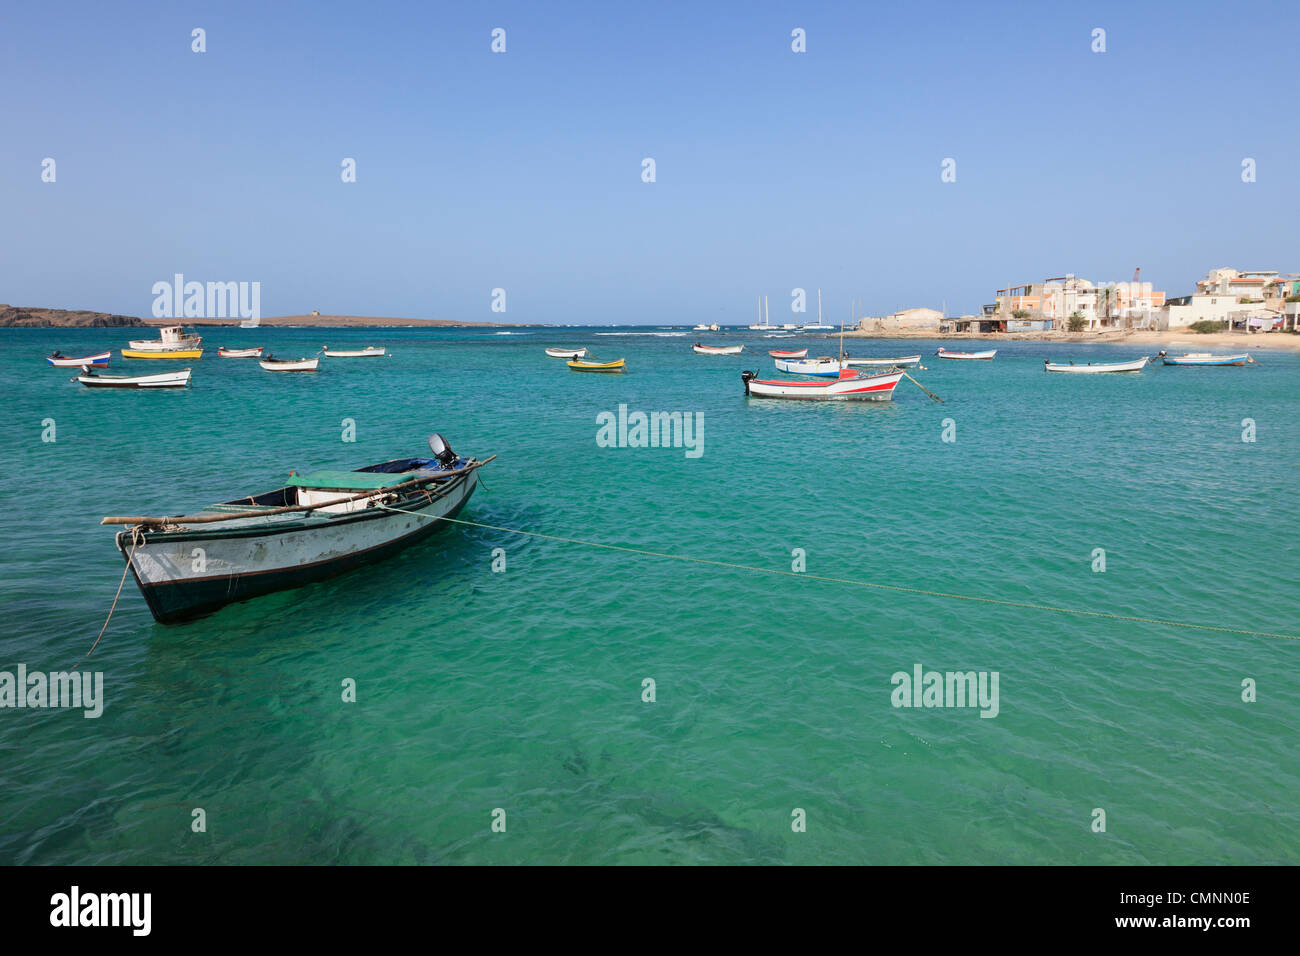 View across the harbour with small fishing boats moored in the turquoise sea. Sal Rei, Boa Vista, Cape Verde Islands, Africa Stock Photo